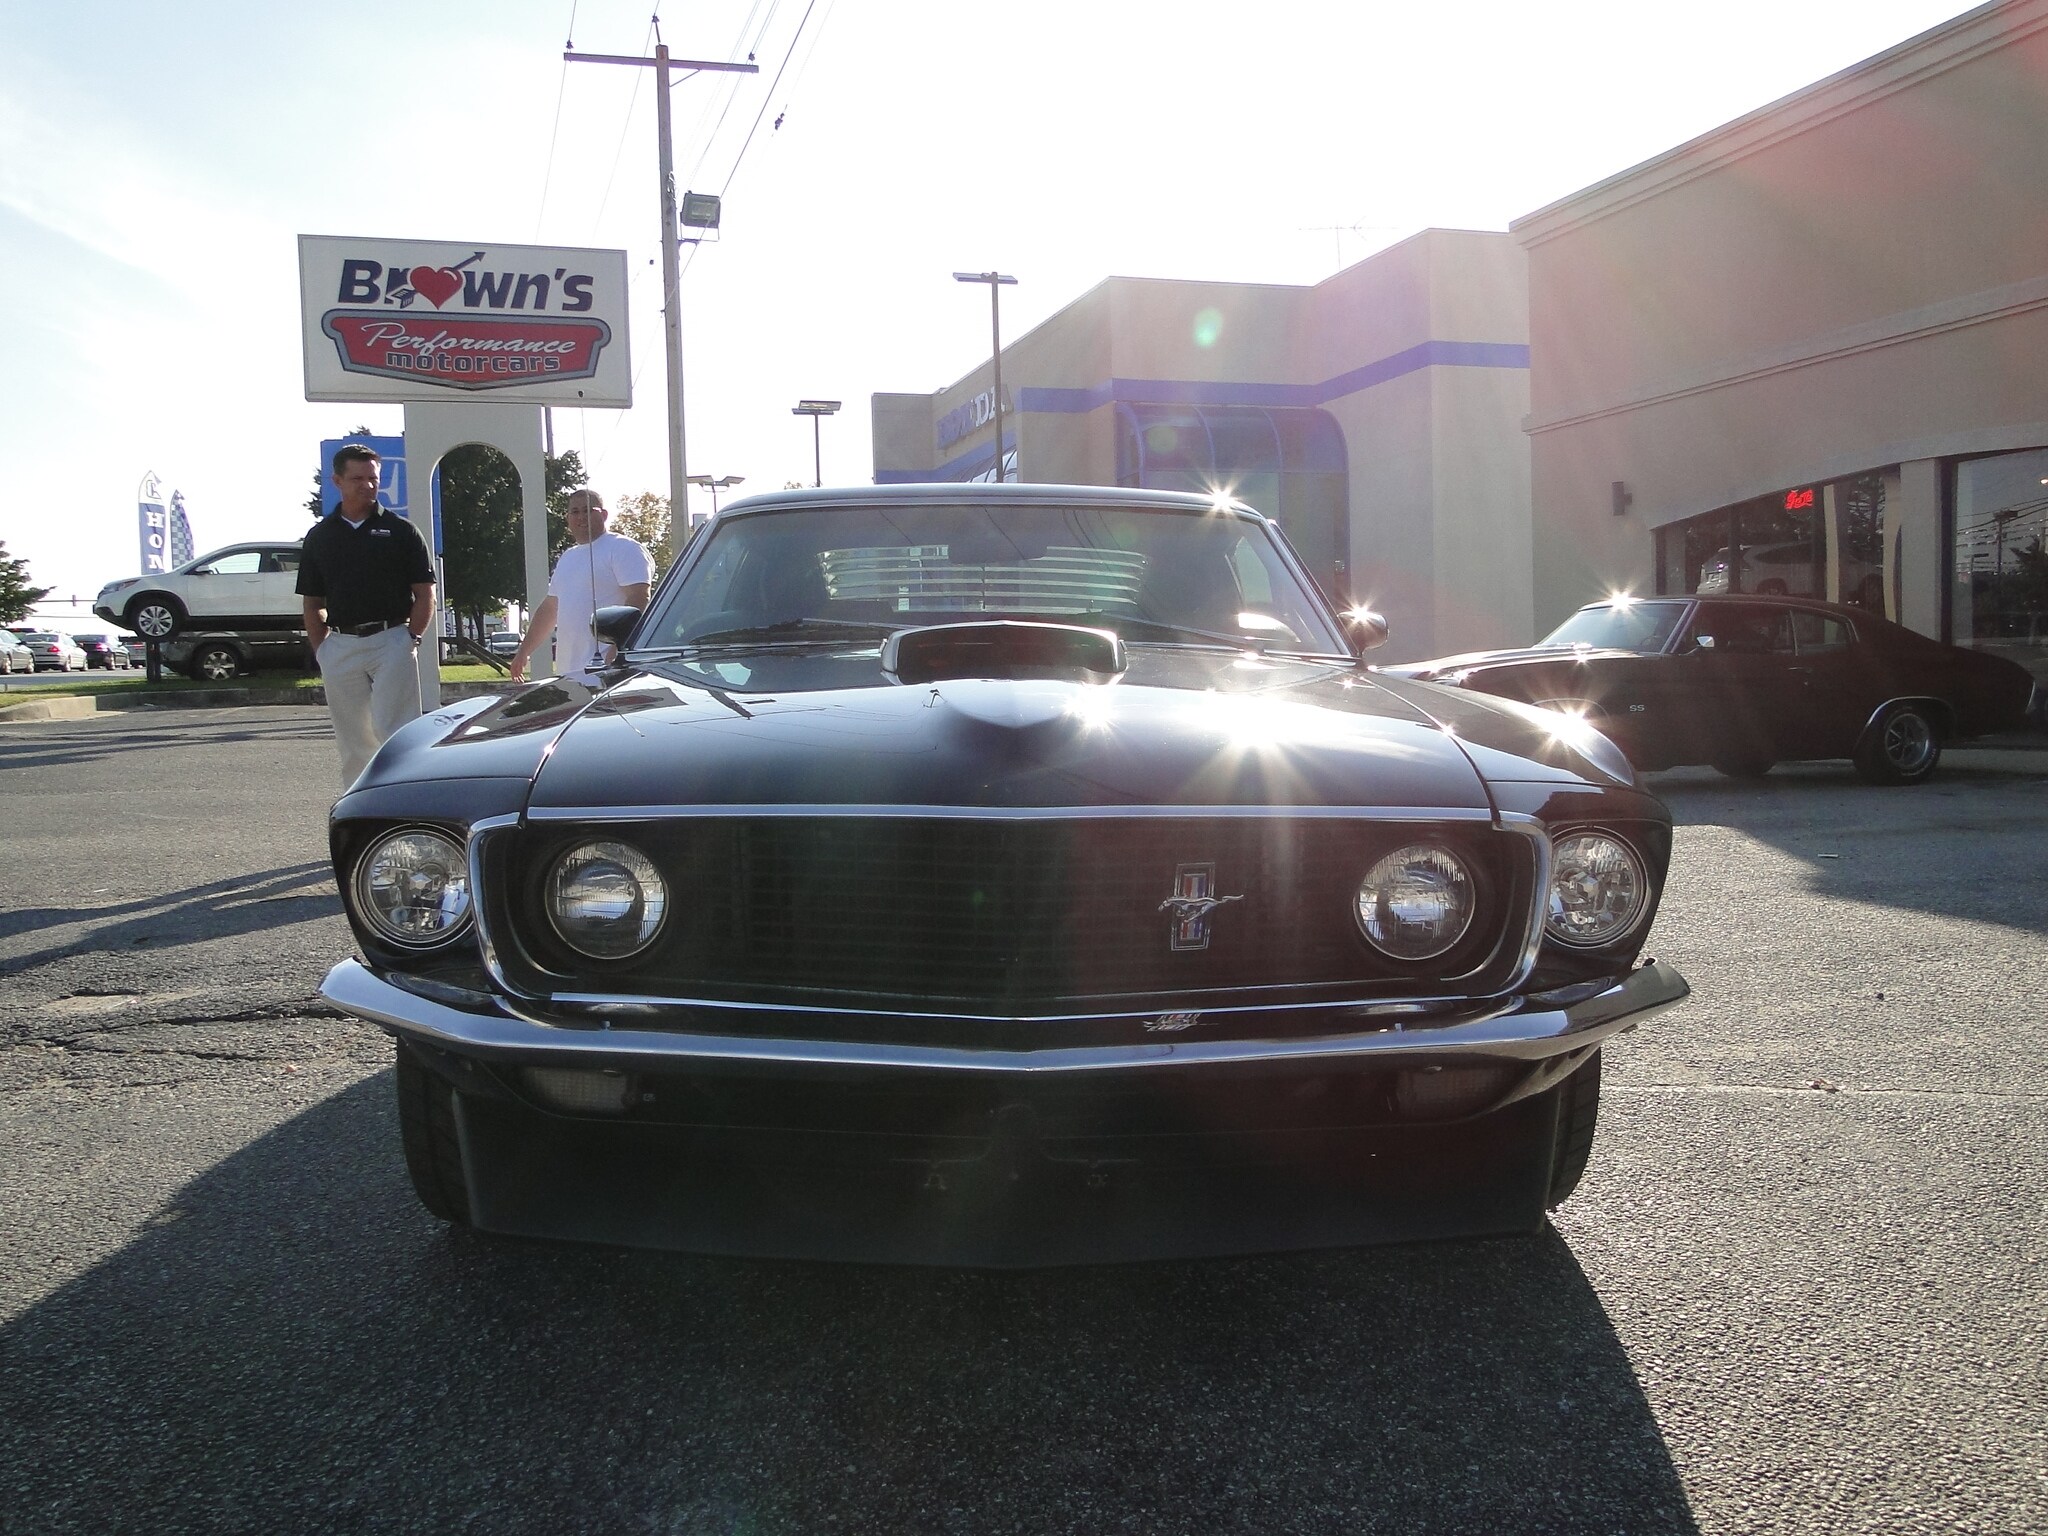 Used 1969 ford mustang fastback sale #10